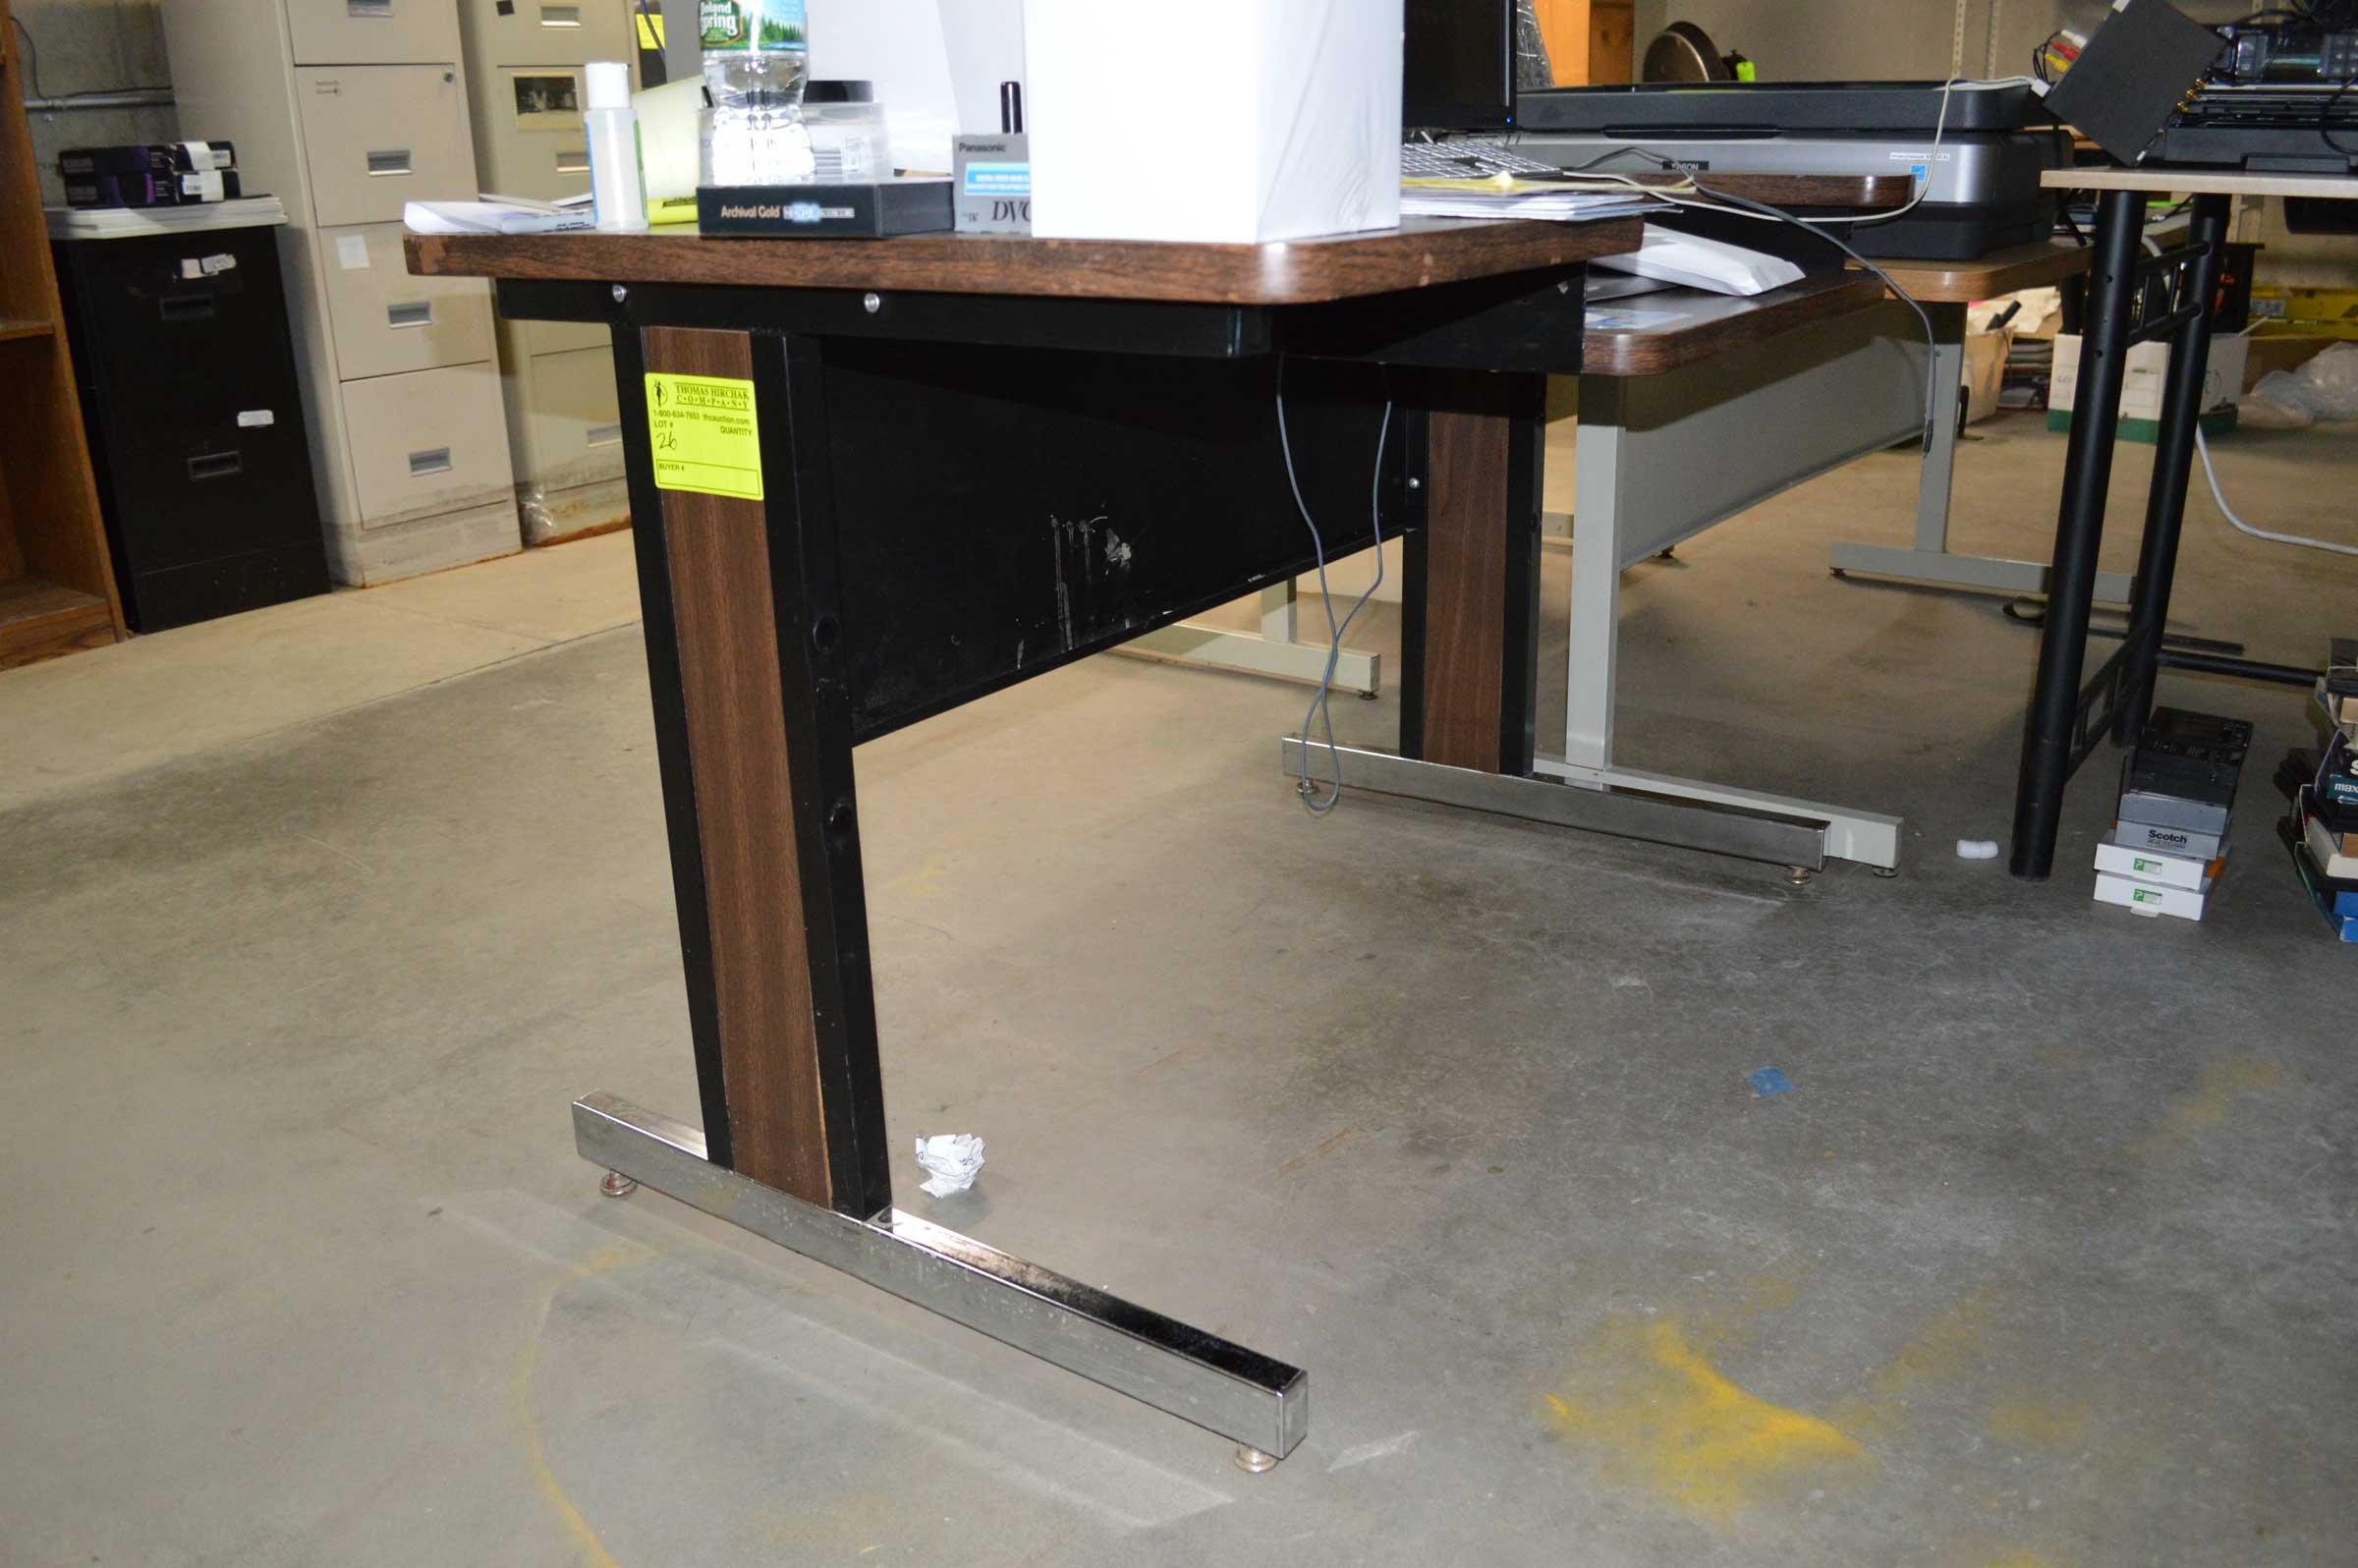 Lot: Office Furniture